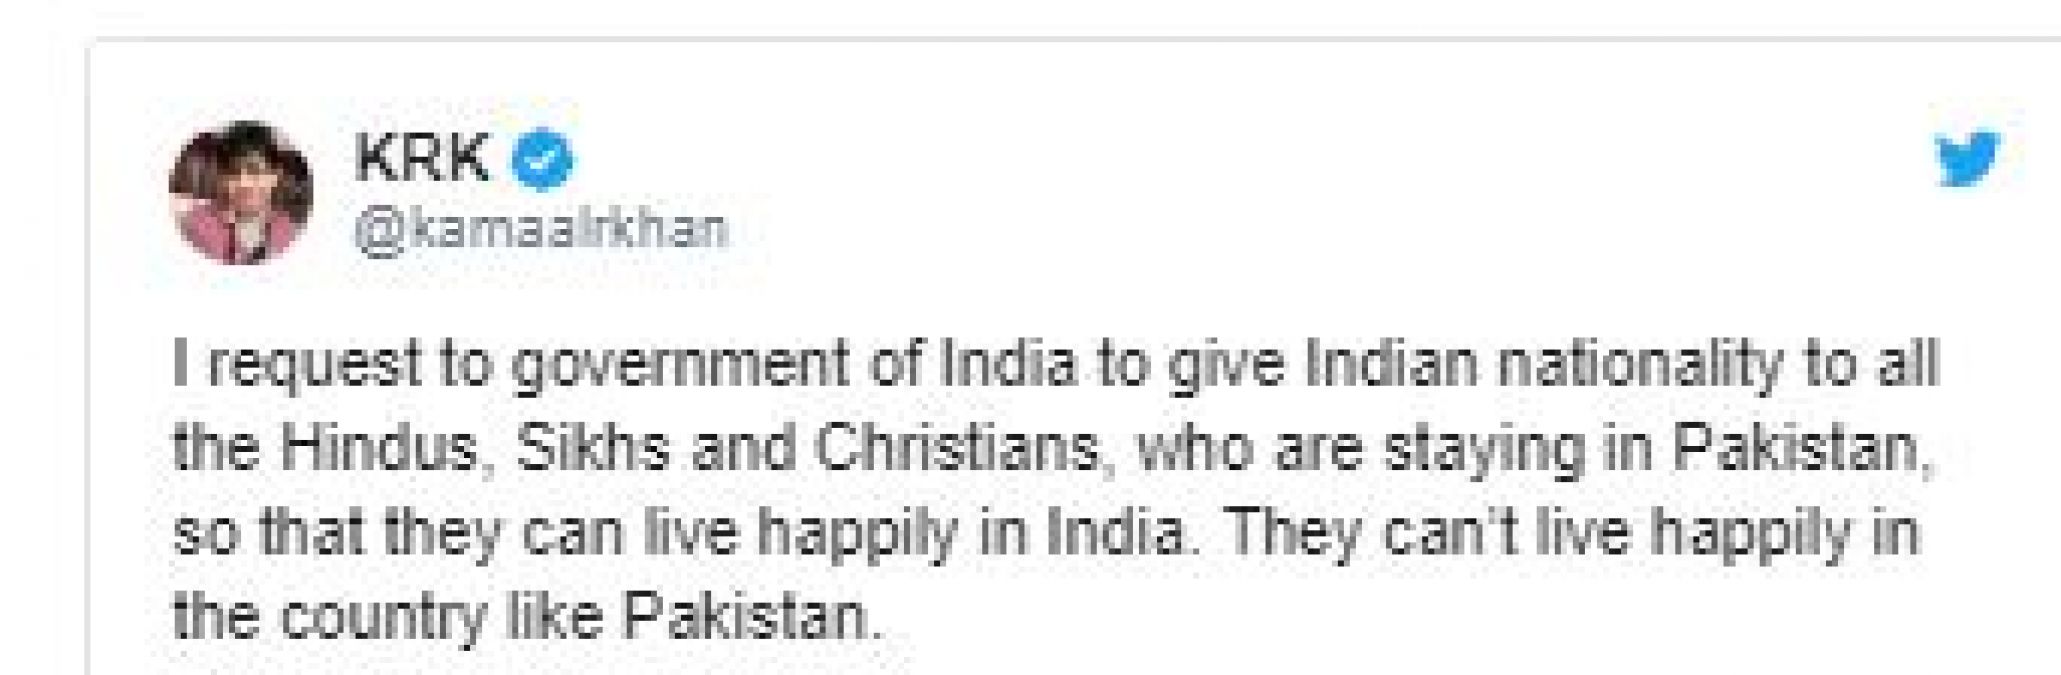 Muslim actor's unique appeal to PM, Big statement on Hindus of Pakistan